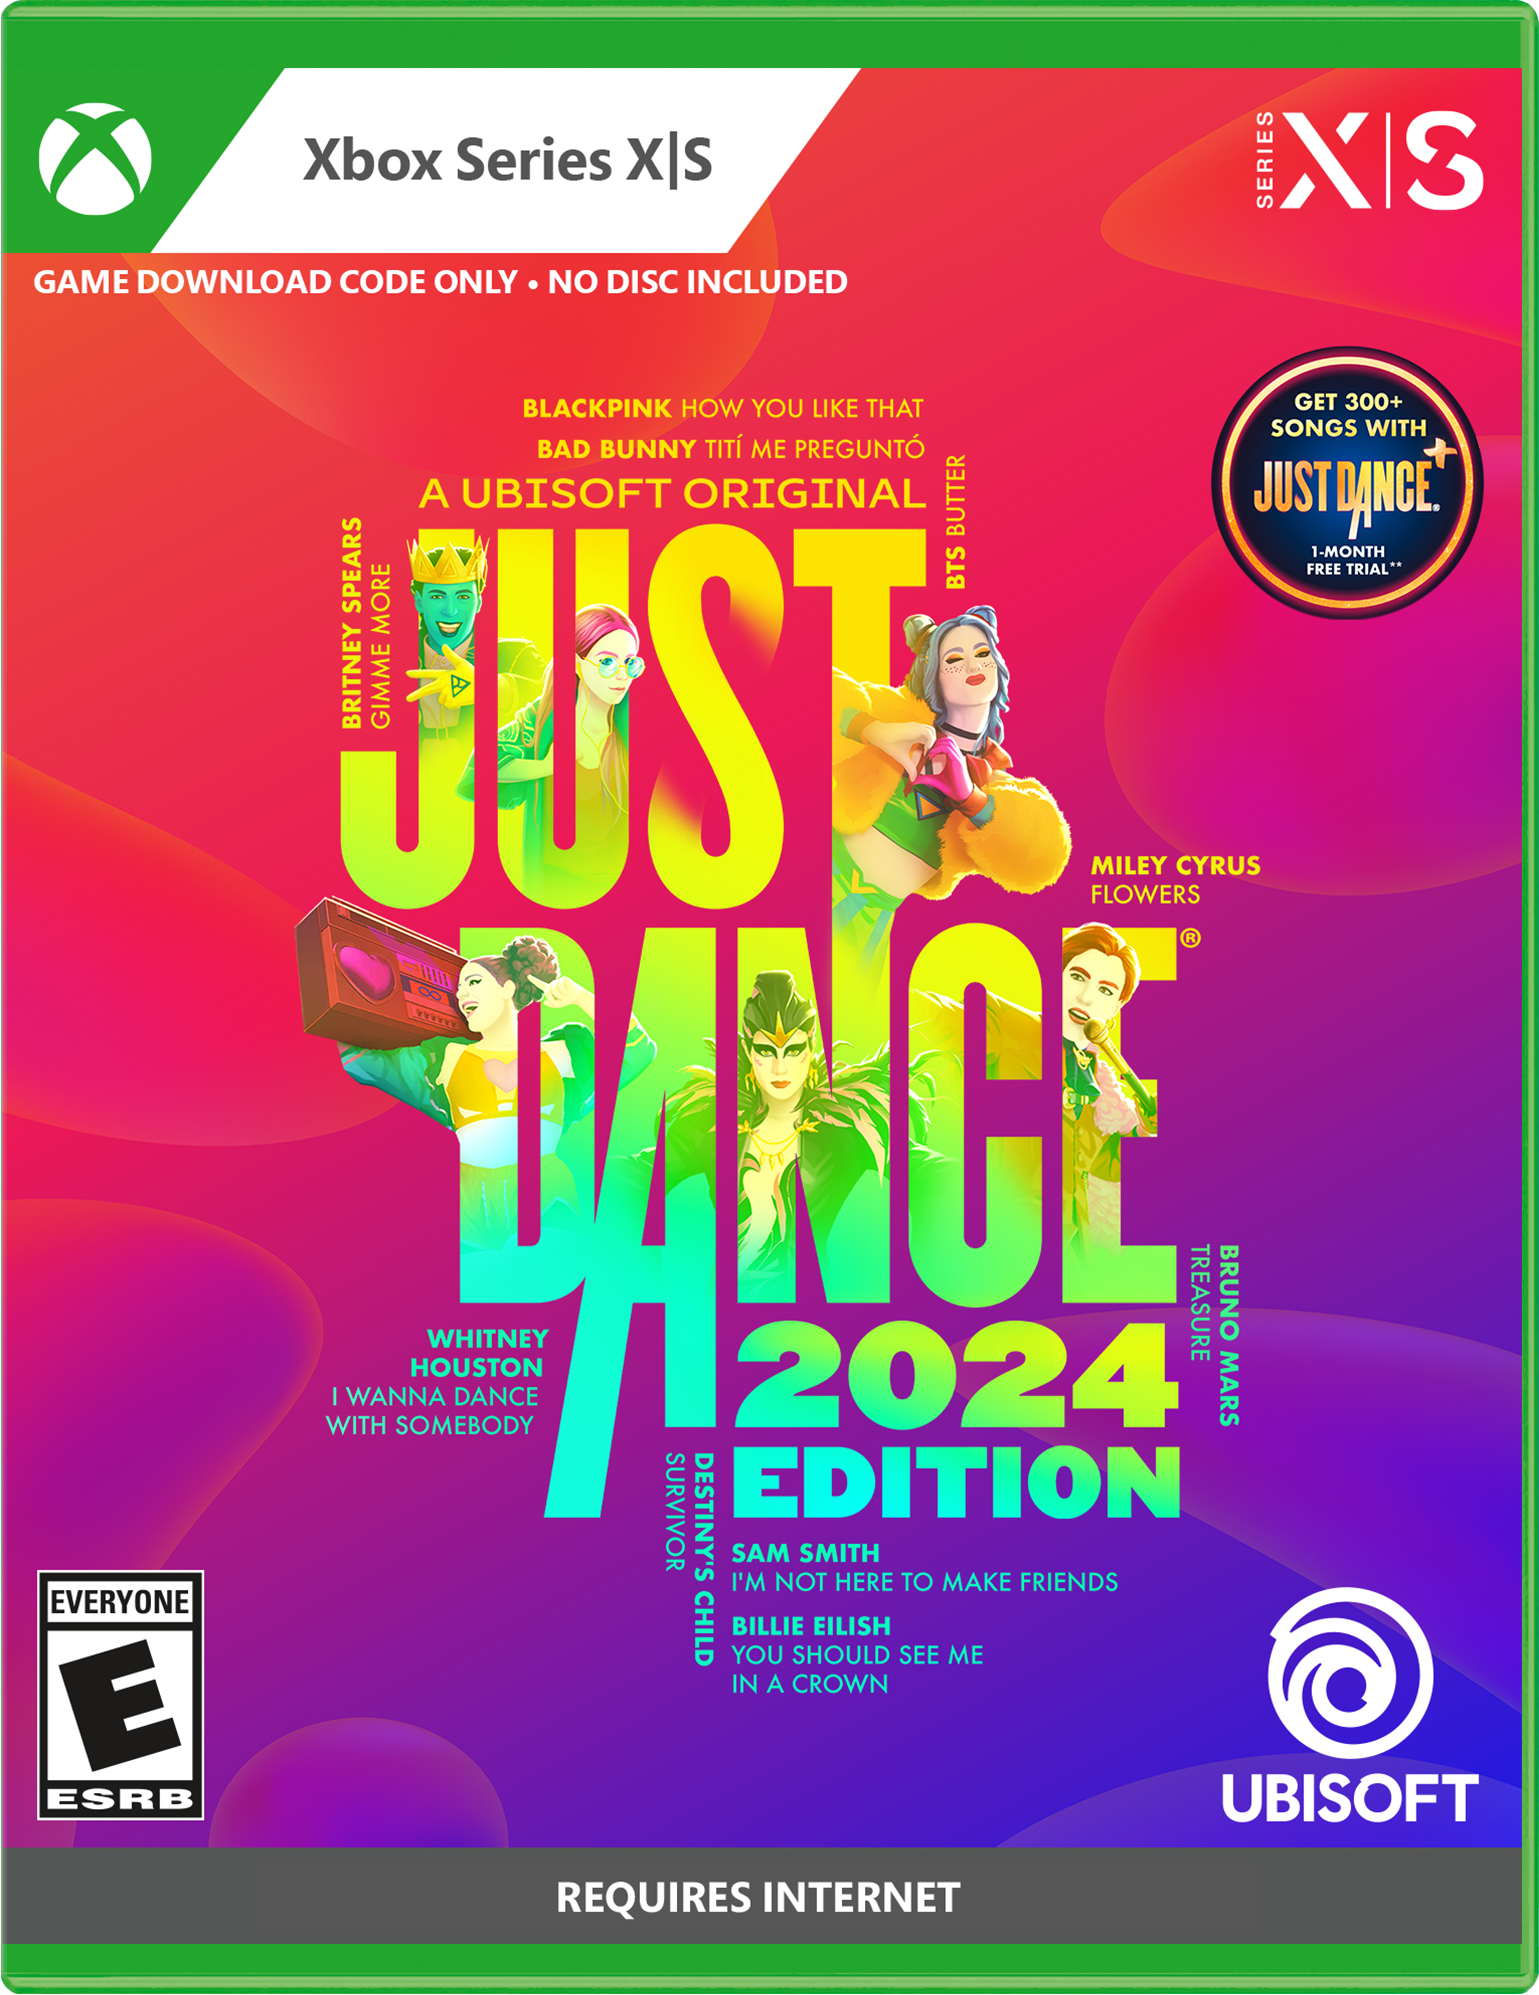  Just Dance 2024 Edition - Standard Edition, Nintendo Switch  (Code in Box & Ubisoft Connect Code) : Video Games